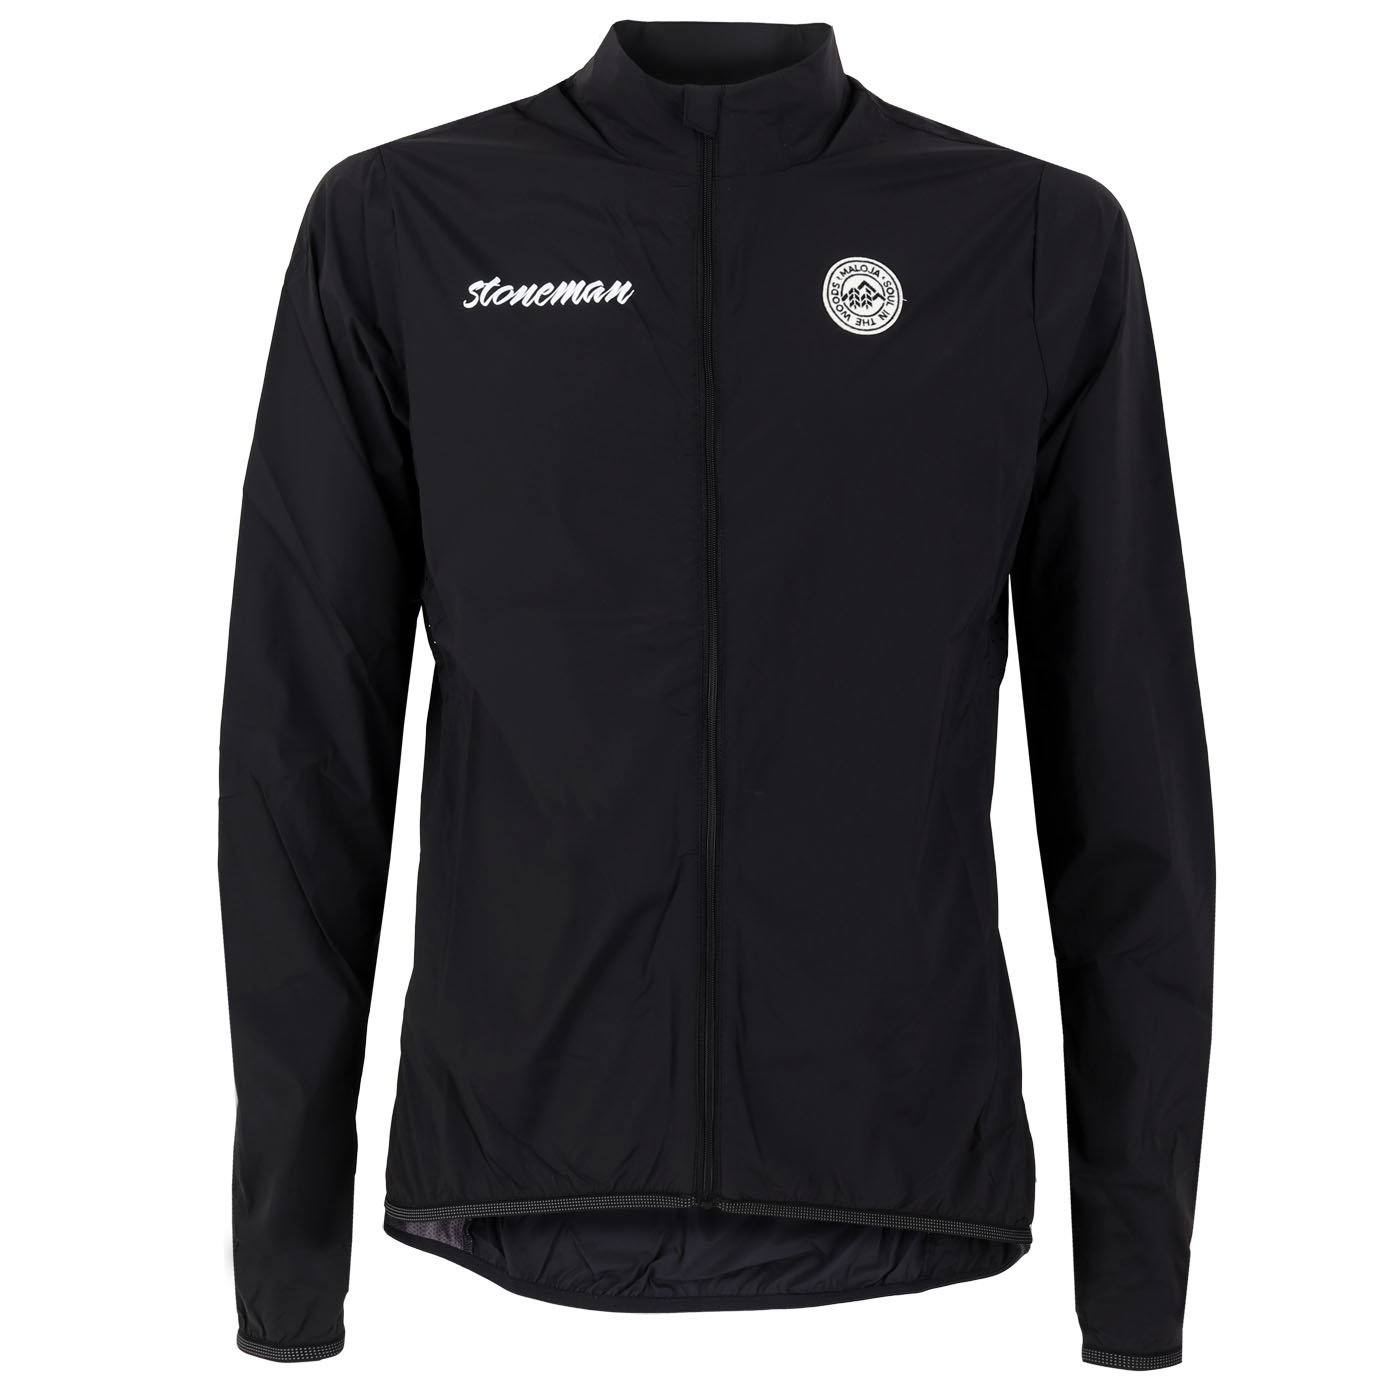 Picture of Stoneman Performance Jacket by Maloja - moonless